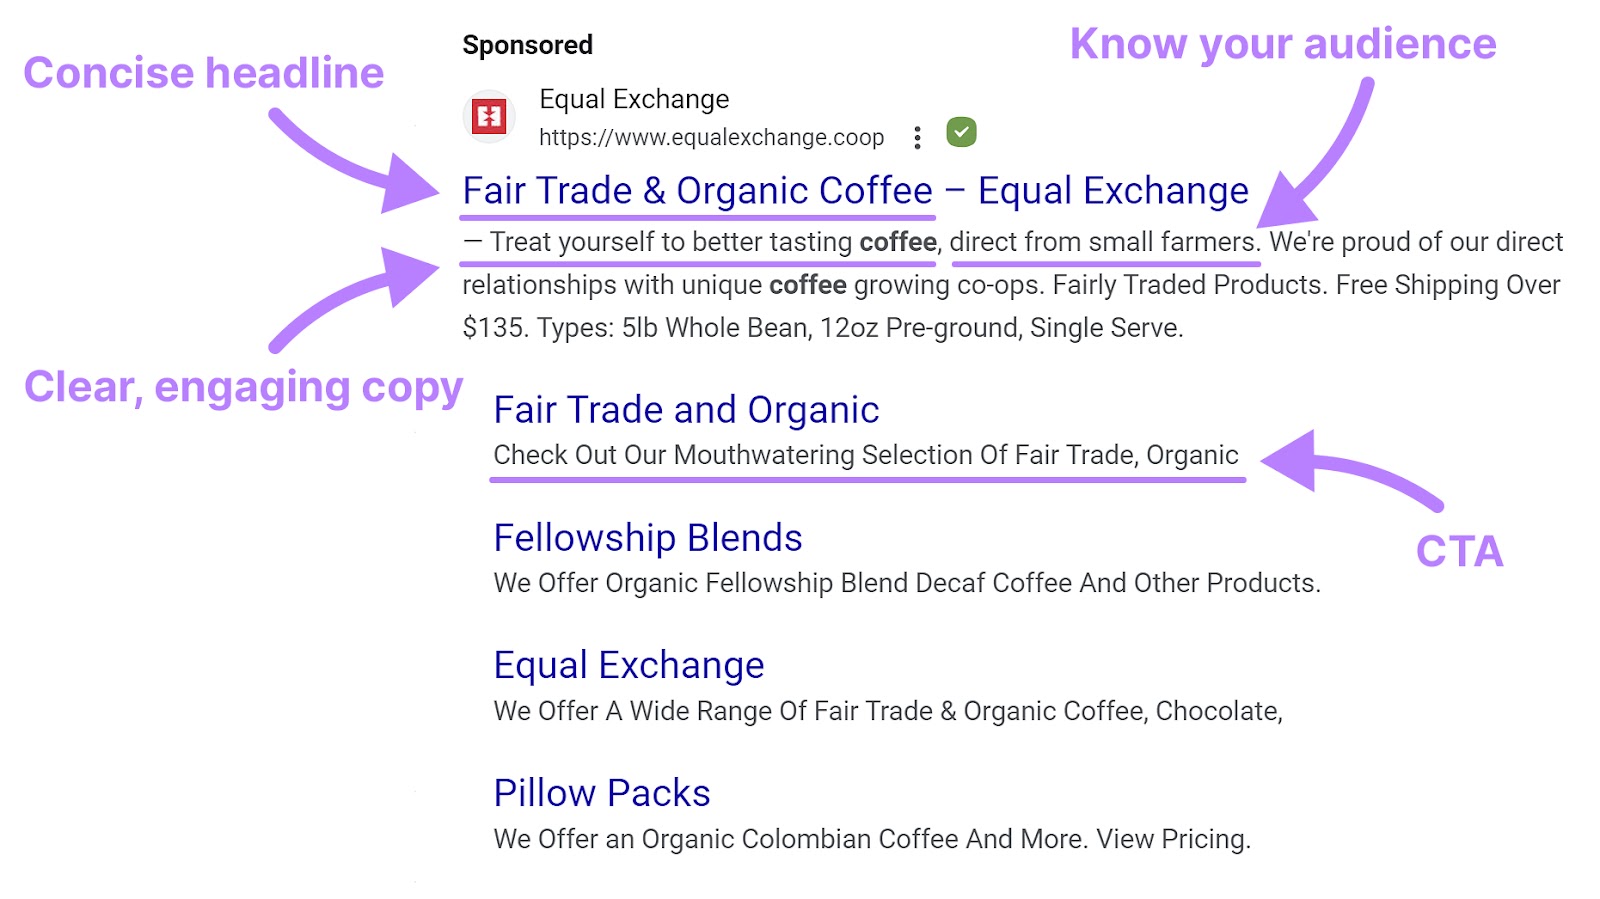 Equal Exchange's Google ad, with concise heading, clear, engaging copy, CTA labels